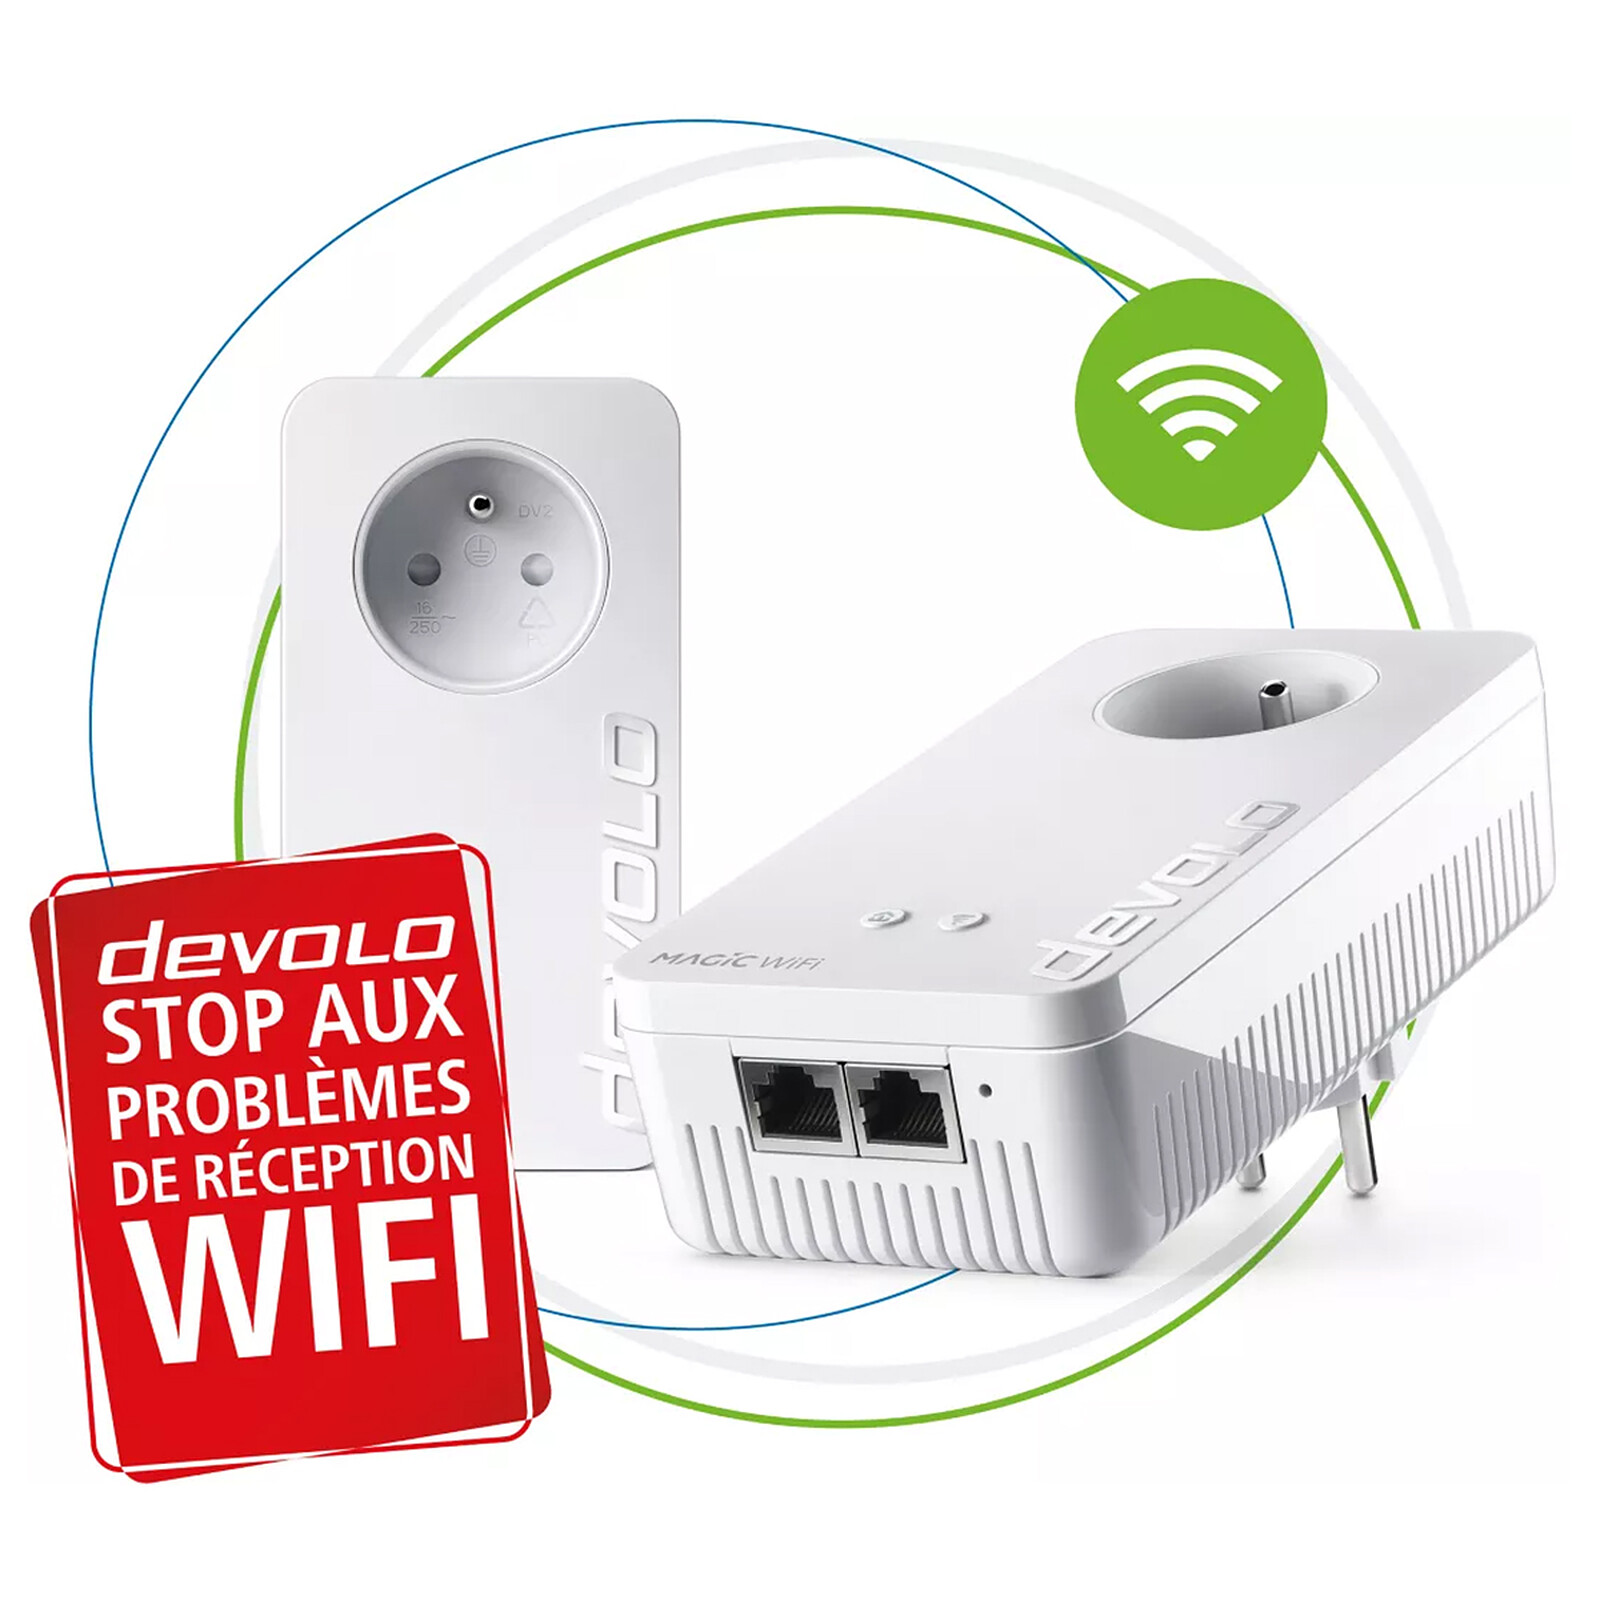 Magic 2 WiFi 6 - The fastest Powerline adapter